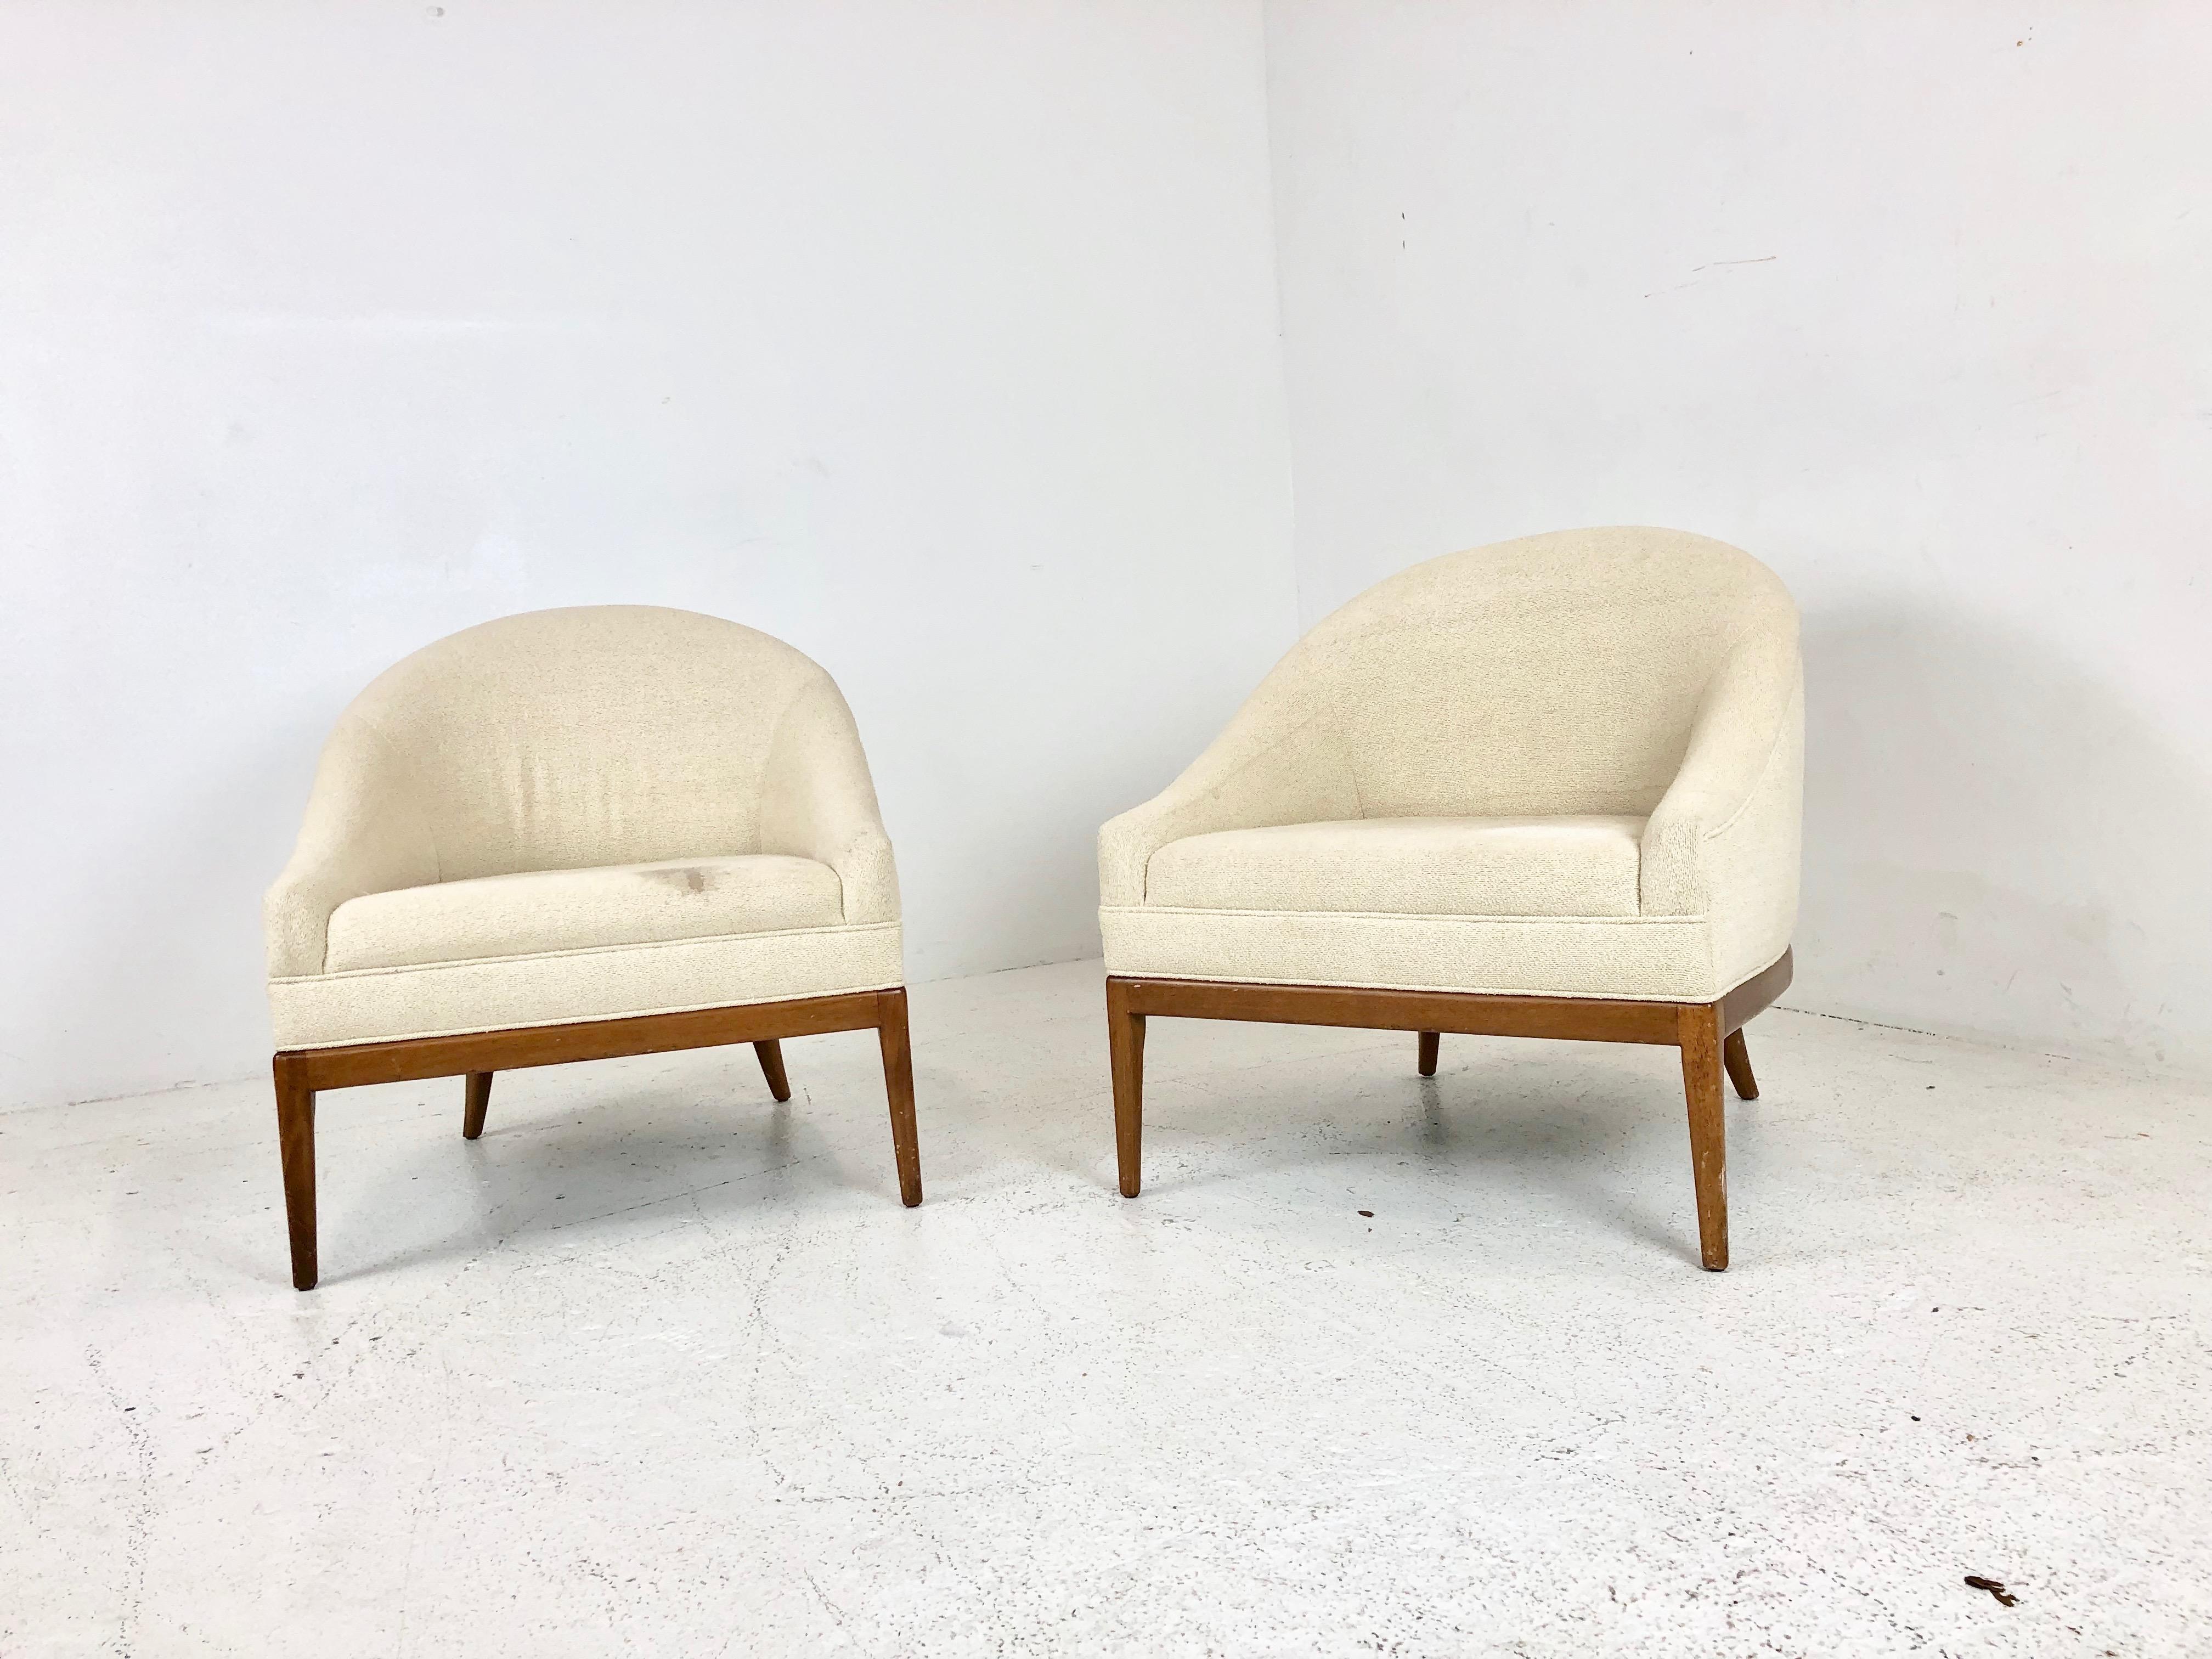 Pair of low seating slipper lounge chairs with wood base in the style of Ward Bennett. Chairs are in good vintage condition. Refinishing and new upholstery is recommended.

Dimensions: 24 W x 28 D x 28 T
seat height 16.
 